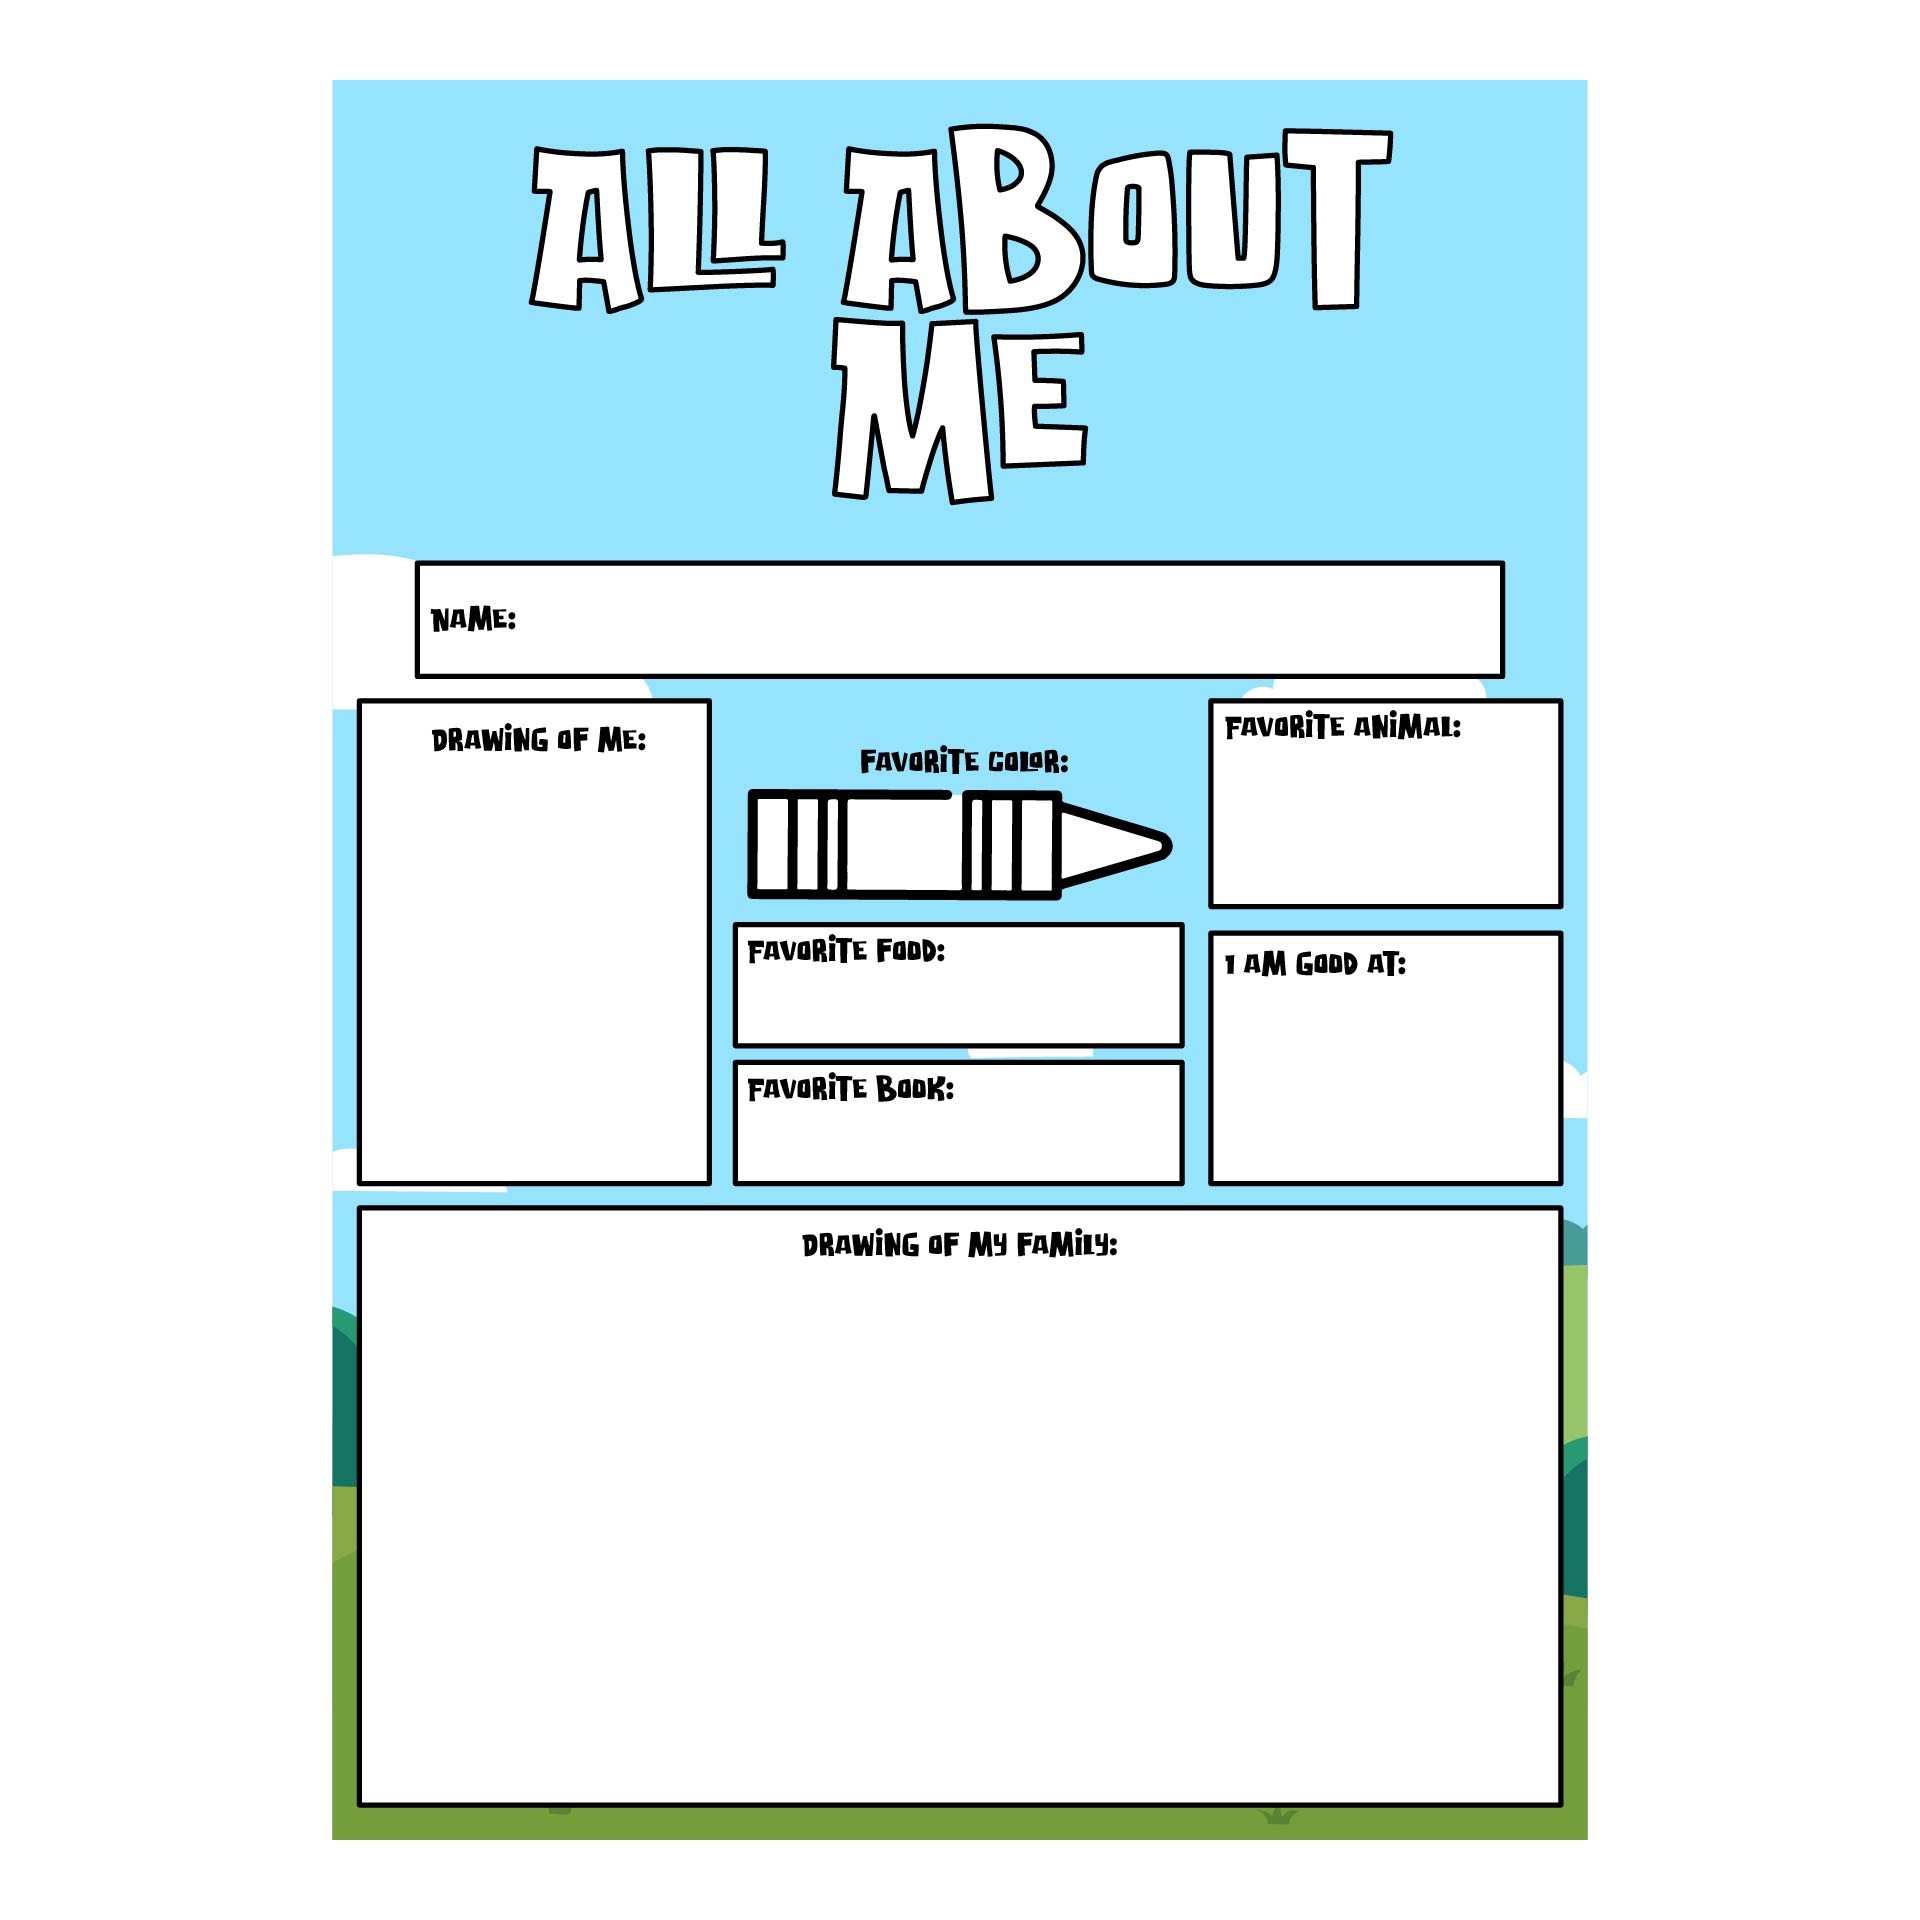 5-best-images-of-all-about-me-worksheets-printables-free-all-about-me-worksheets-printables